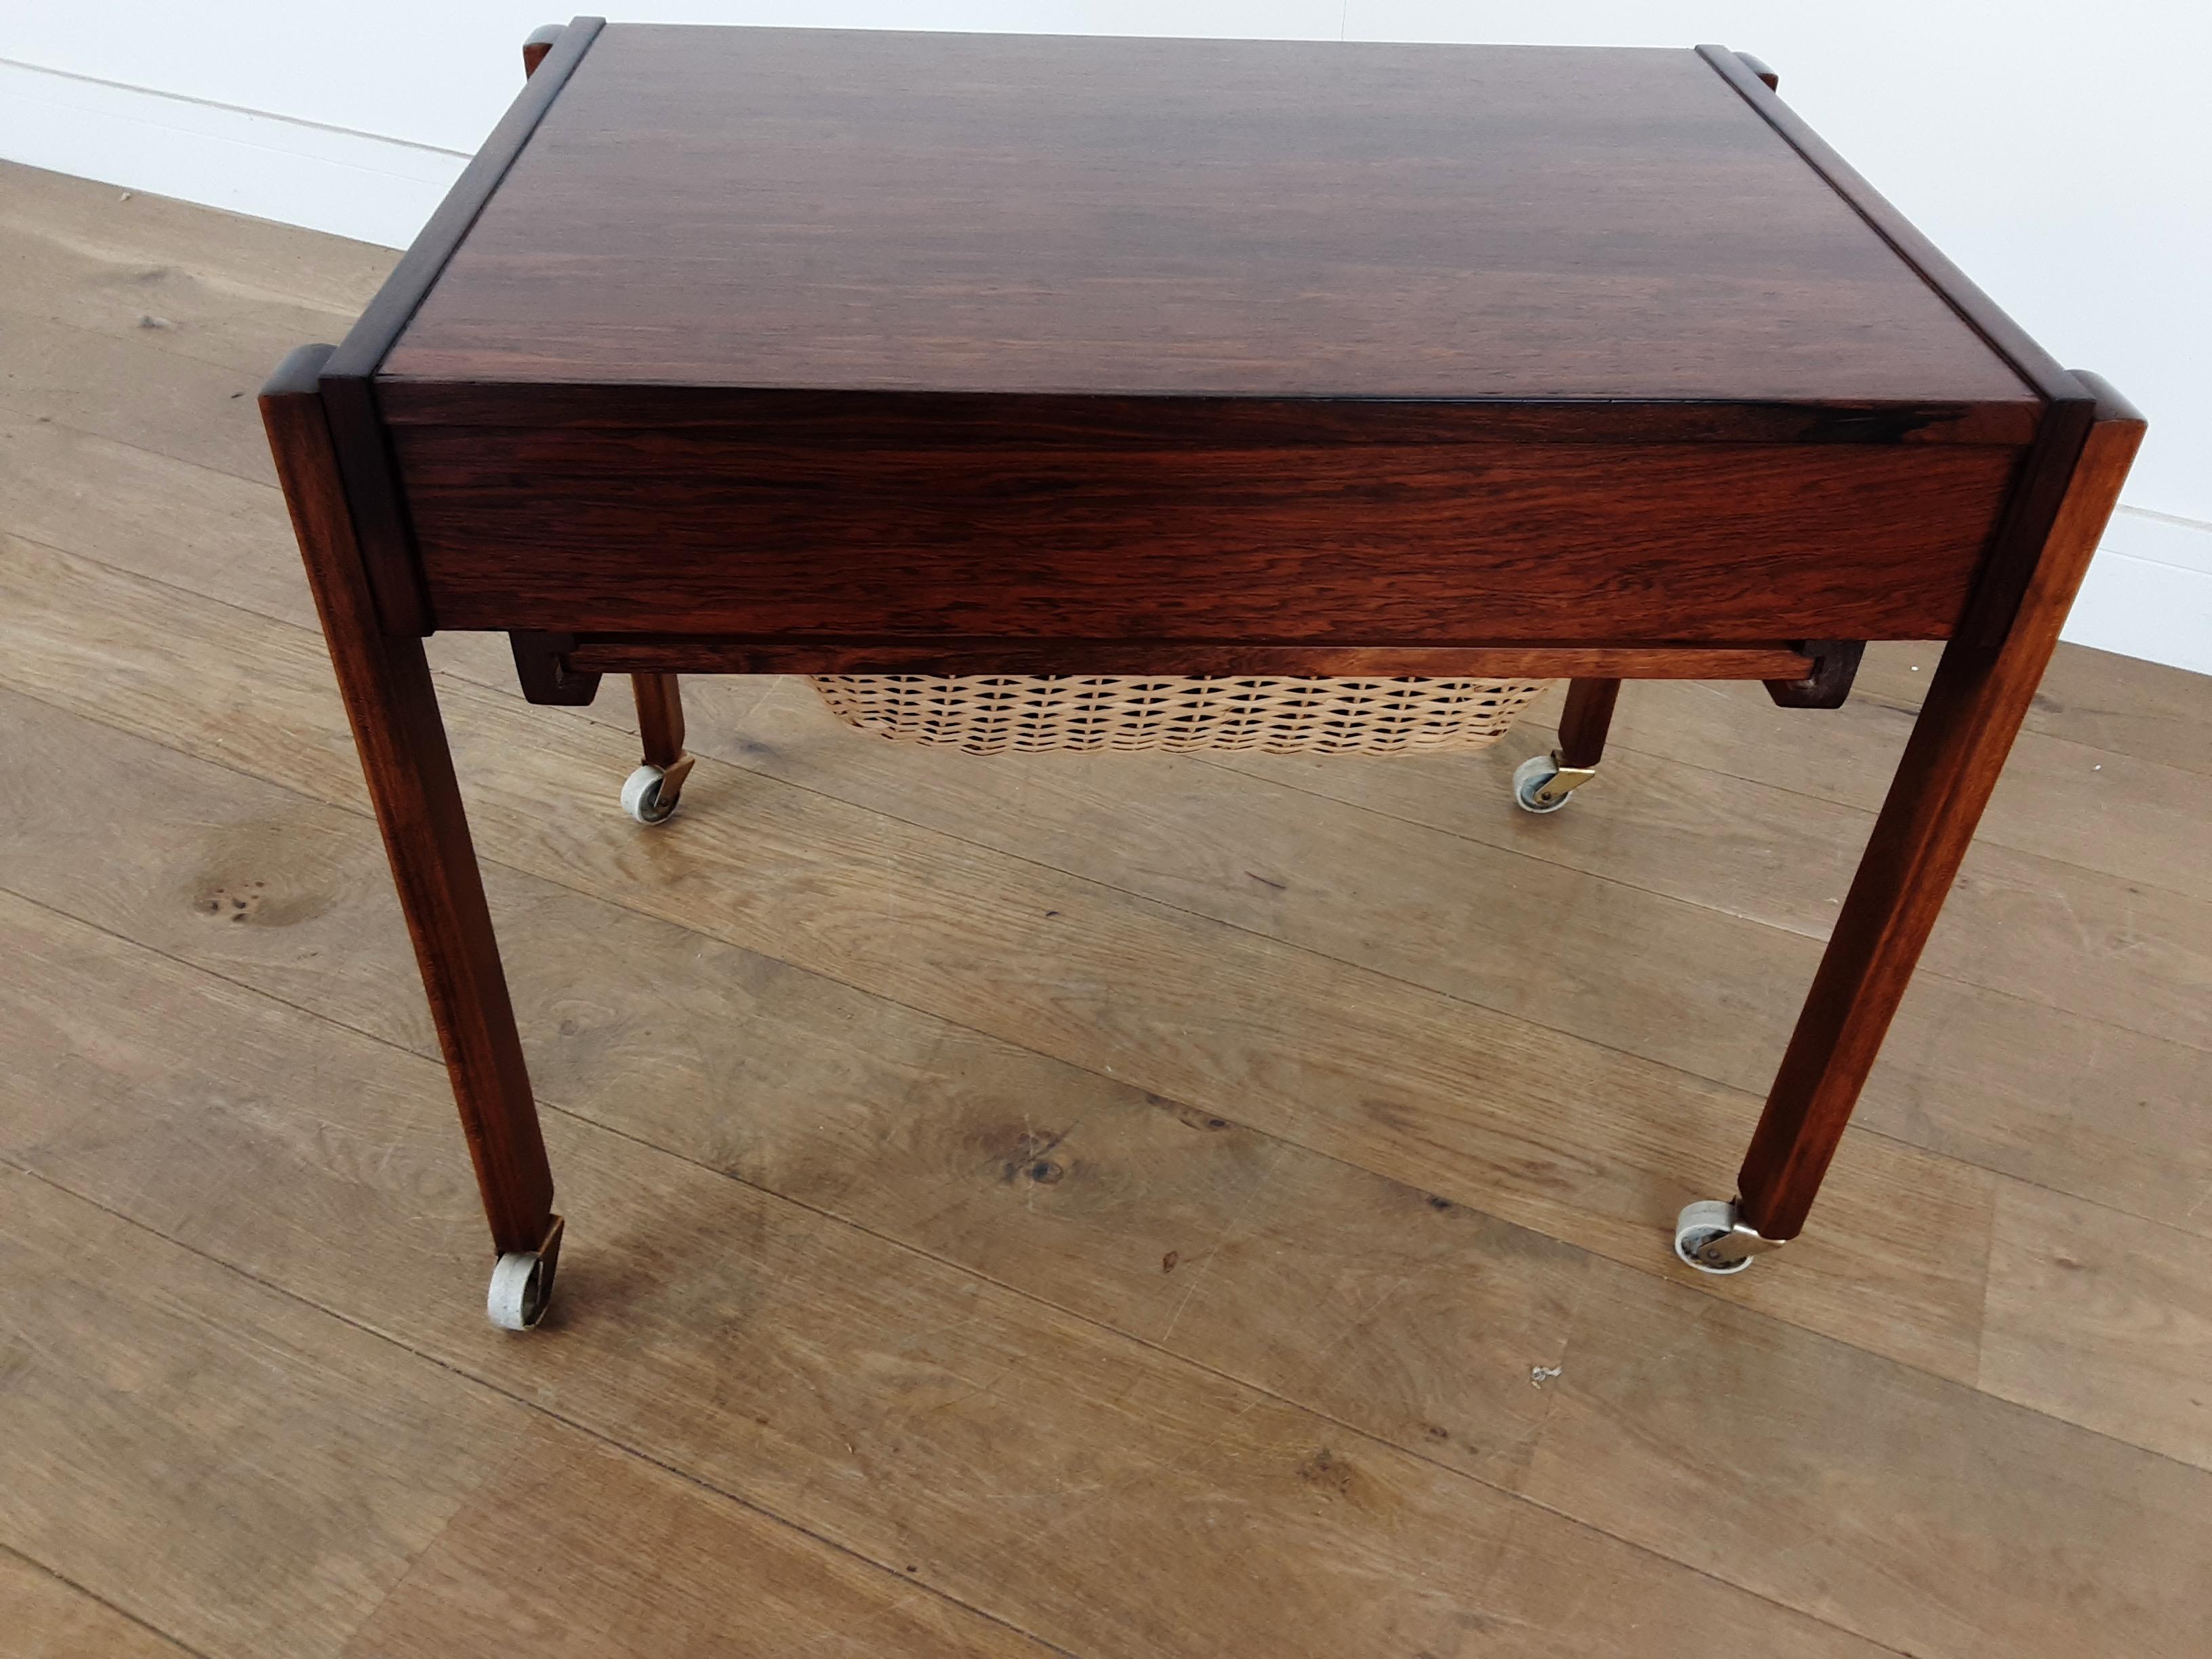 Midcentury Rosewood Table with Sectioned Drawer and Storage Basket For Sale 3